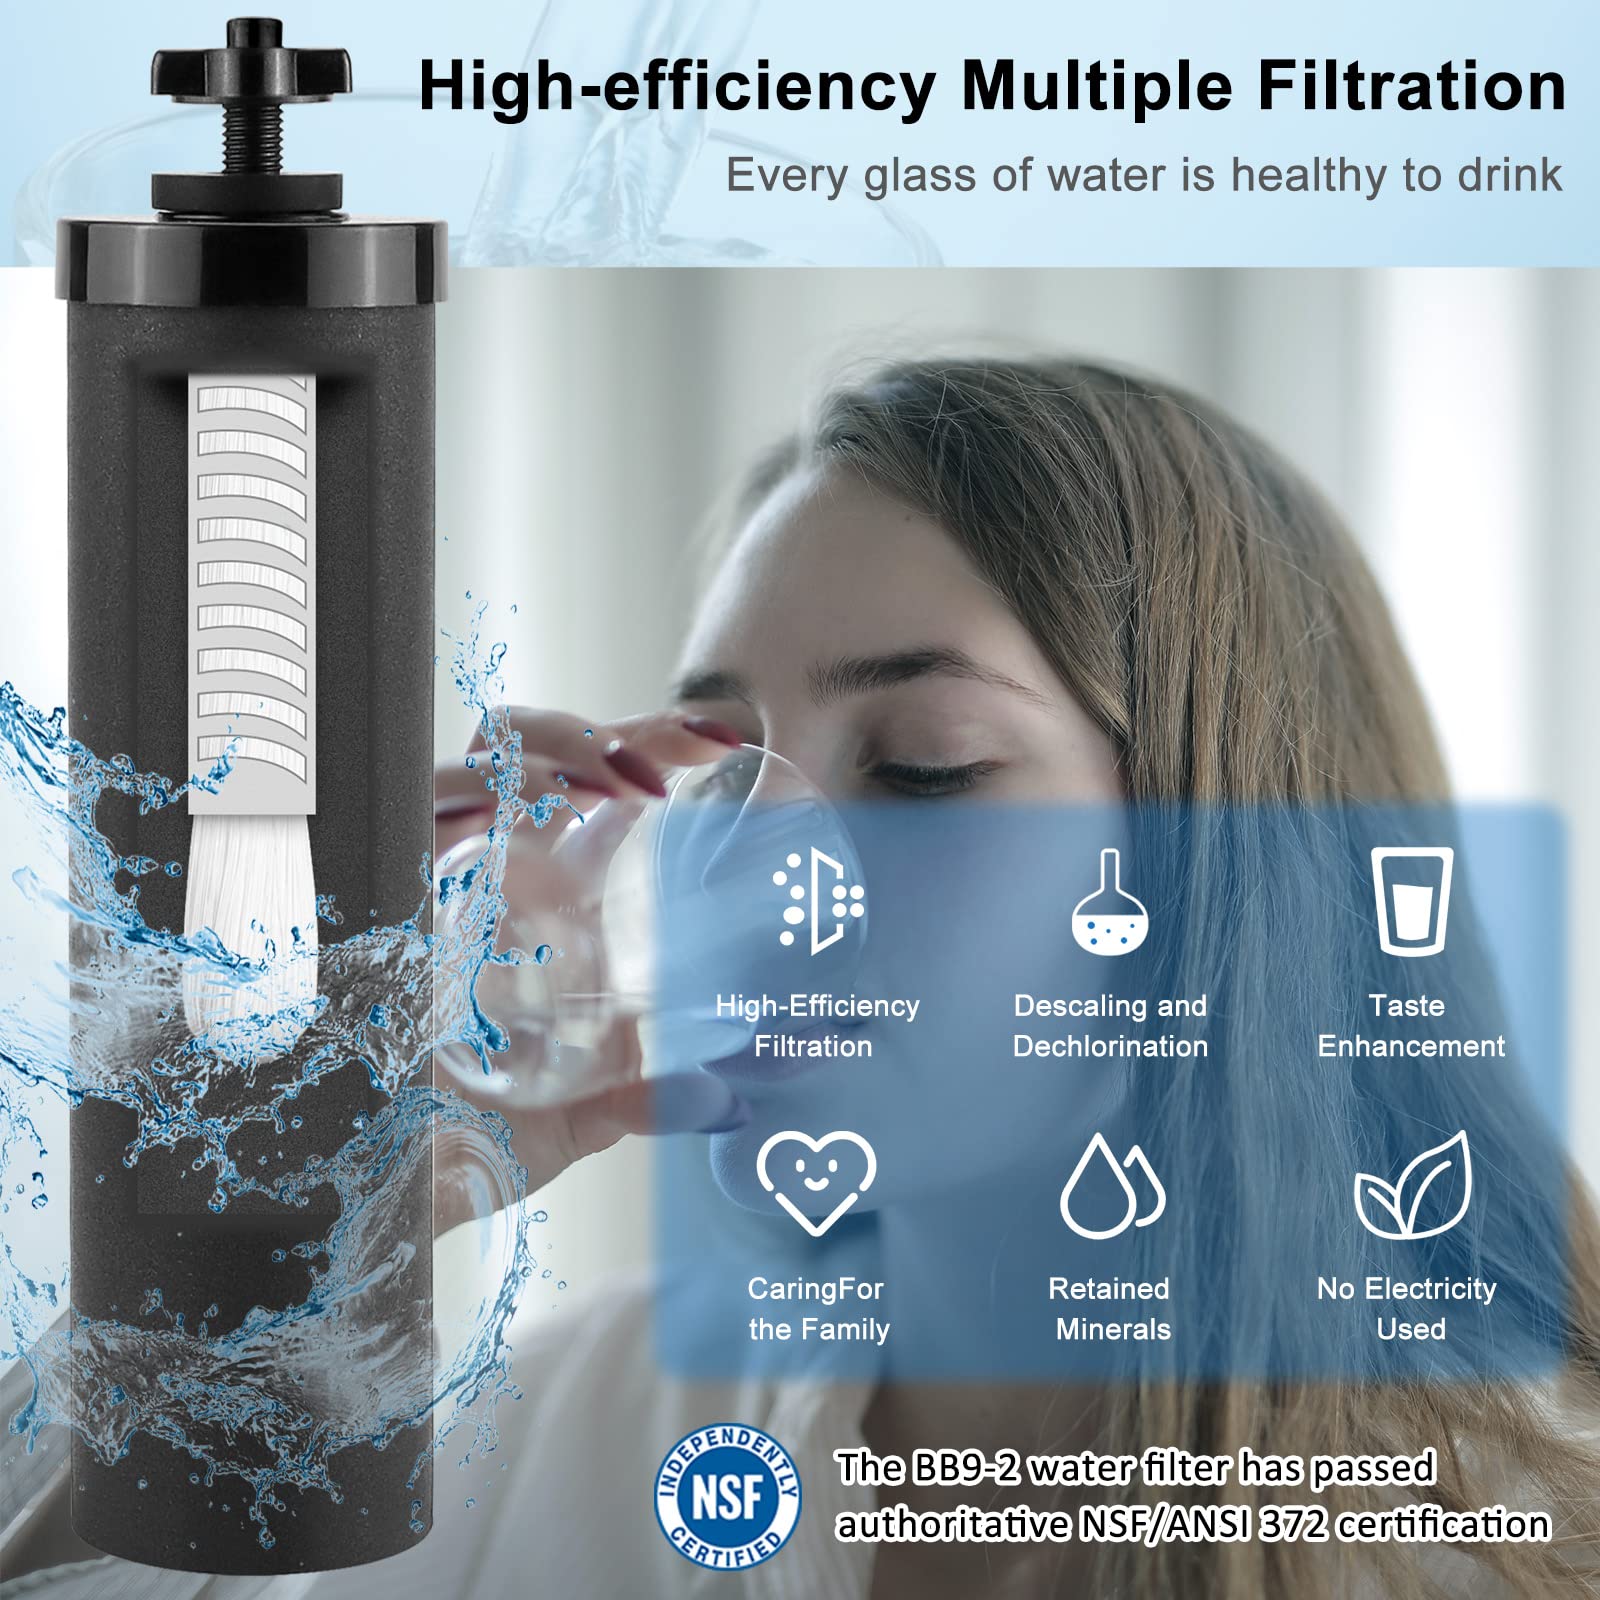 Black Purification Element Replacement Filter Compatible with Purification Elements and Gravity Water Filter System-Fetechmate Series,Big Series,NSF/ANSI 372